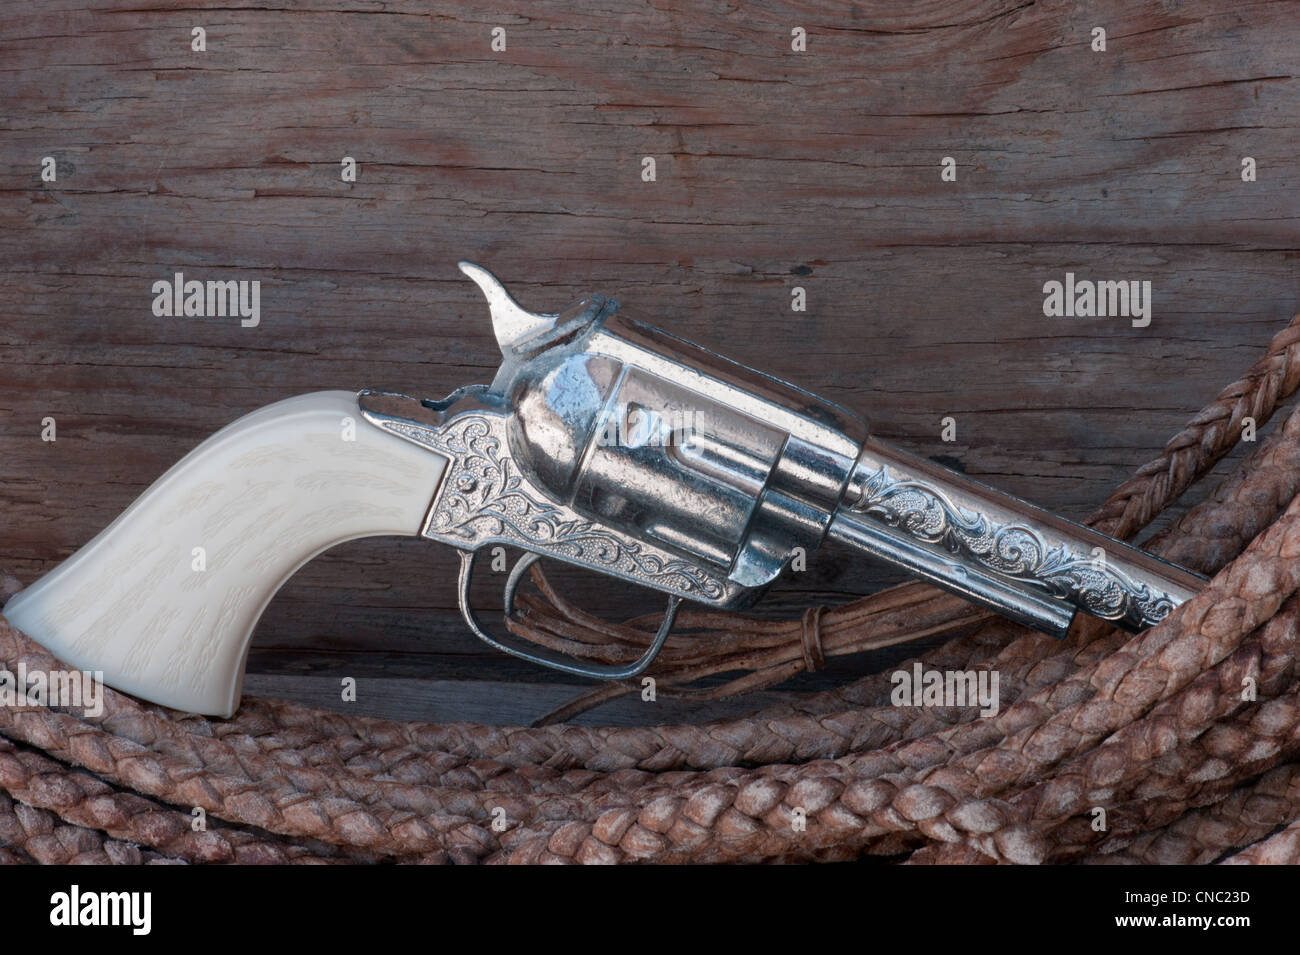 Gun toy replica on lariat rope with wood background and text space. Stock Photo